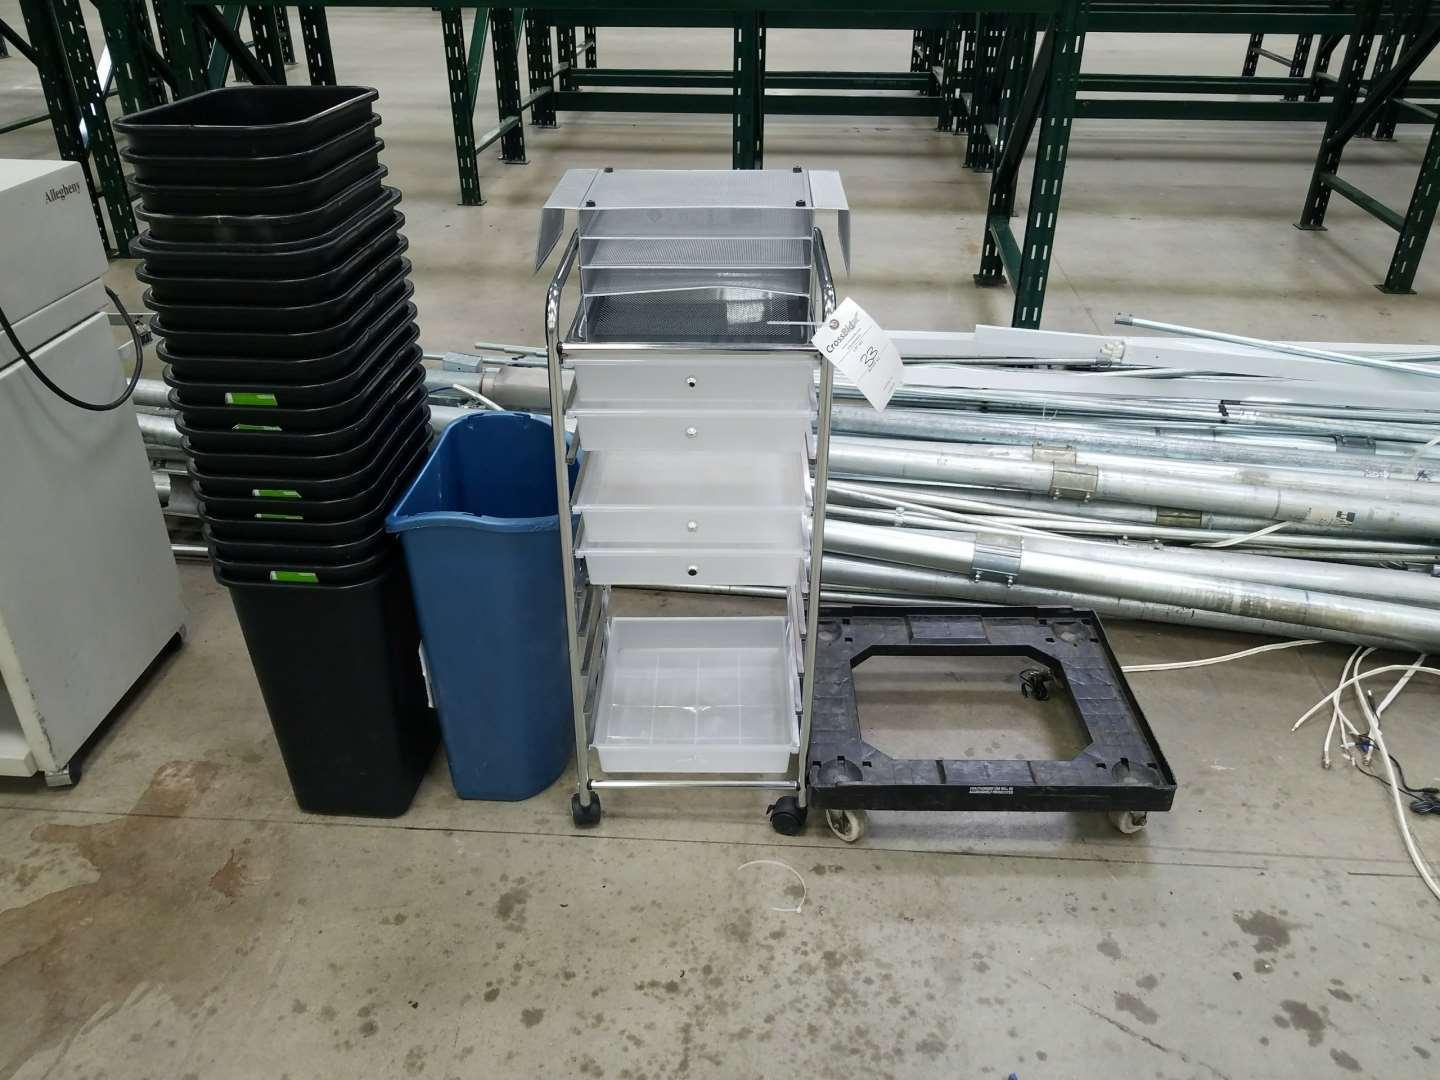 Assorted Office Supplies Including, Trash Cans, Roll Around Organizer Cart, And Four Wheel Dolly